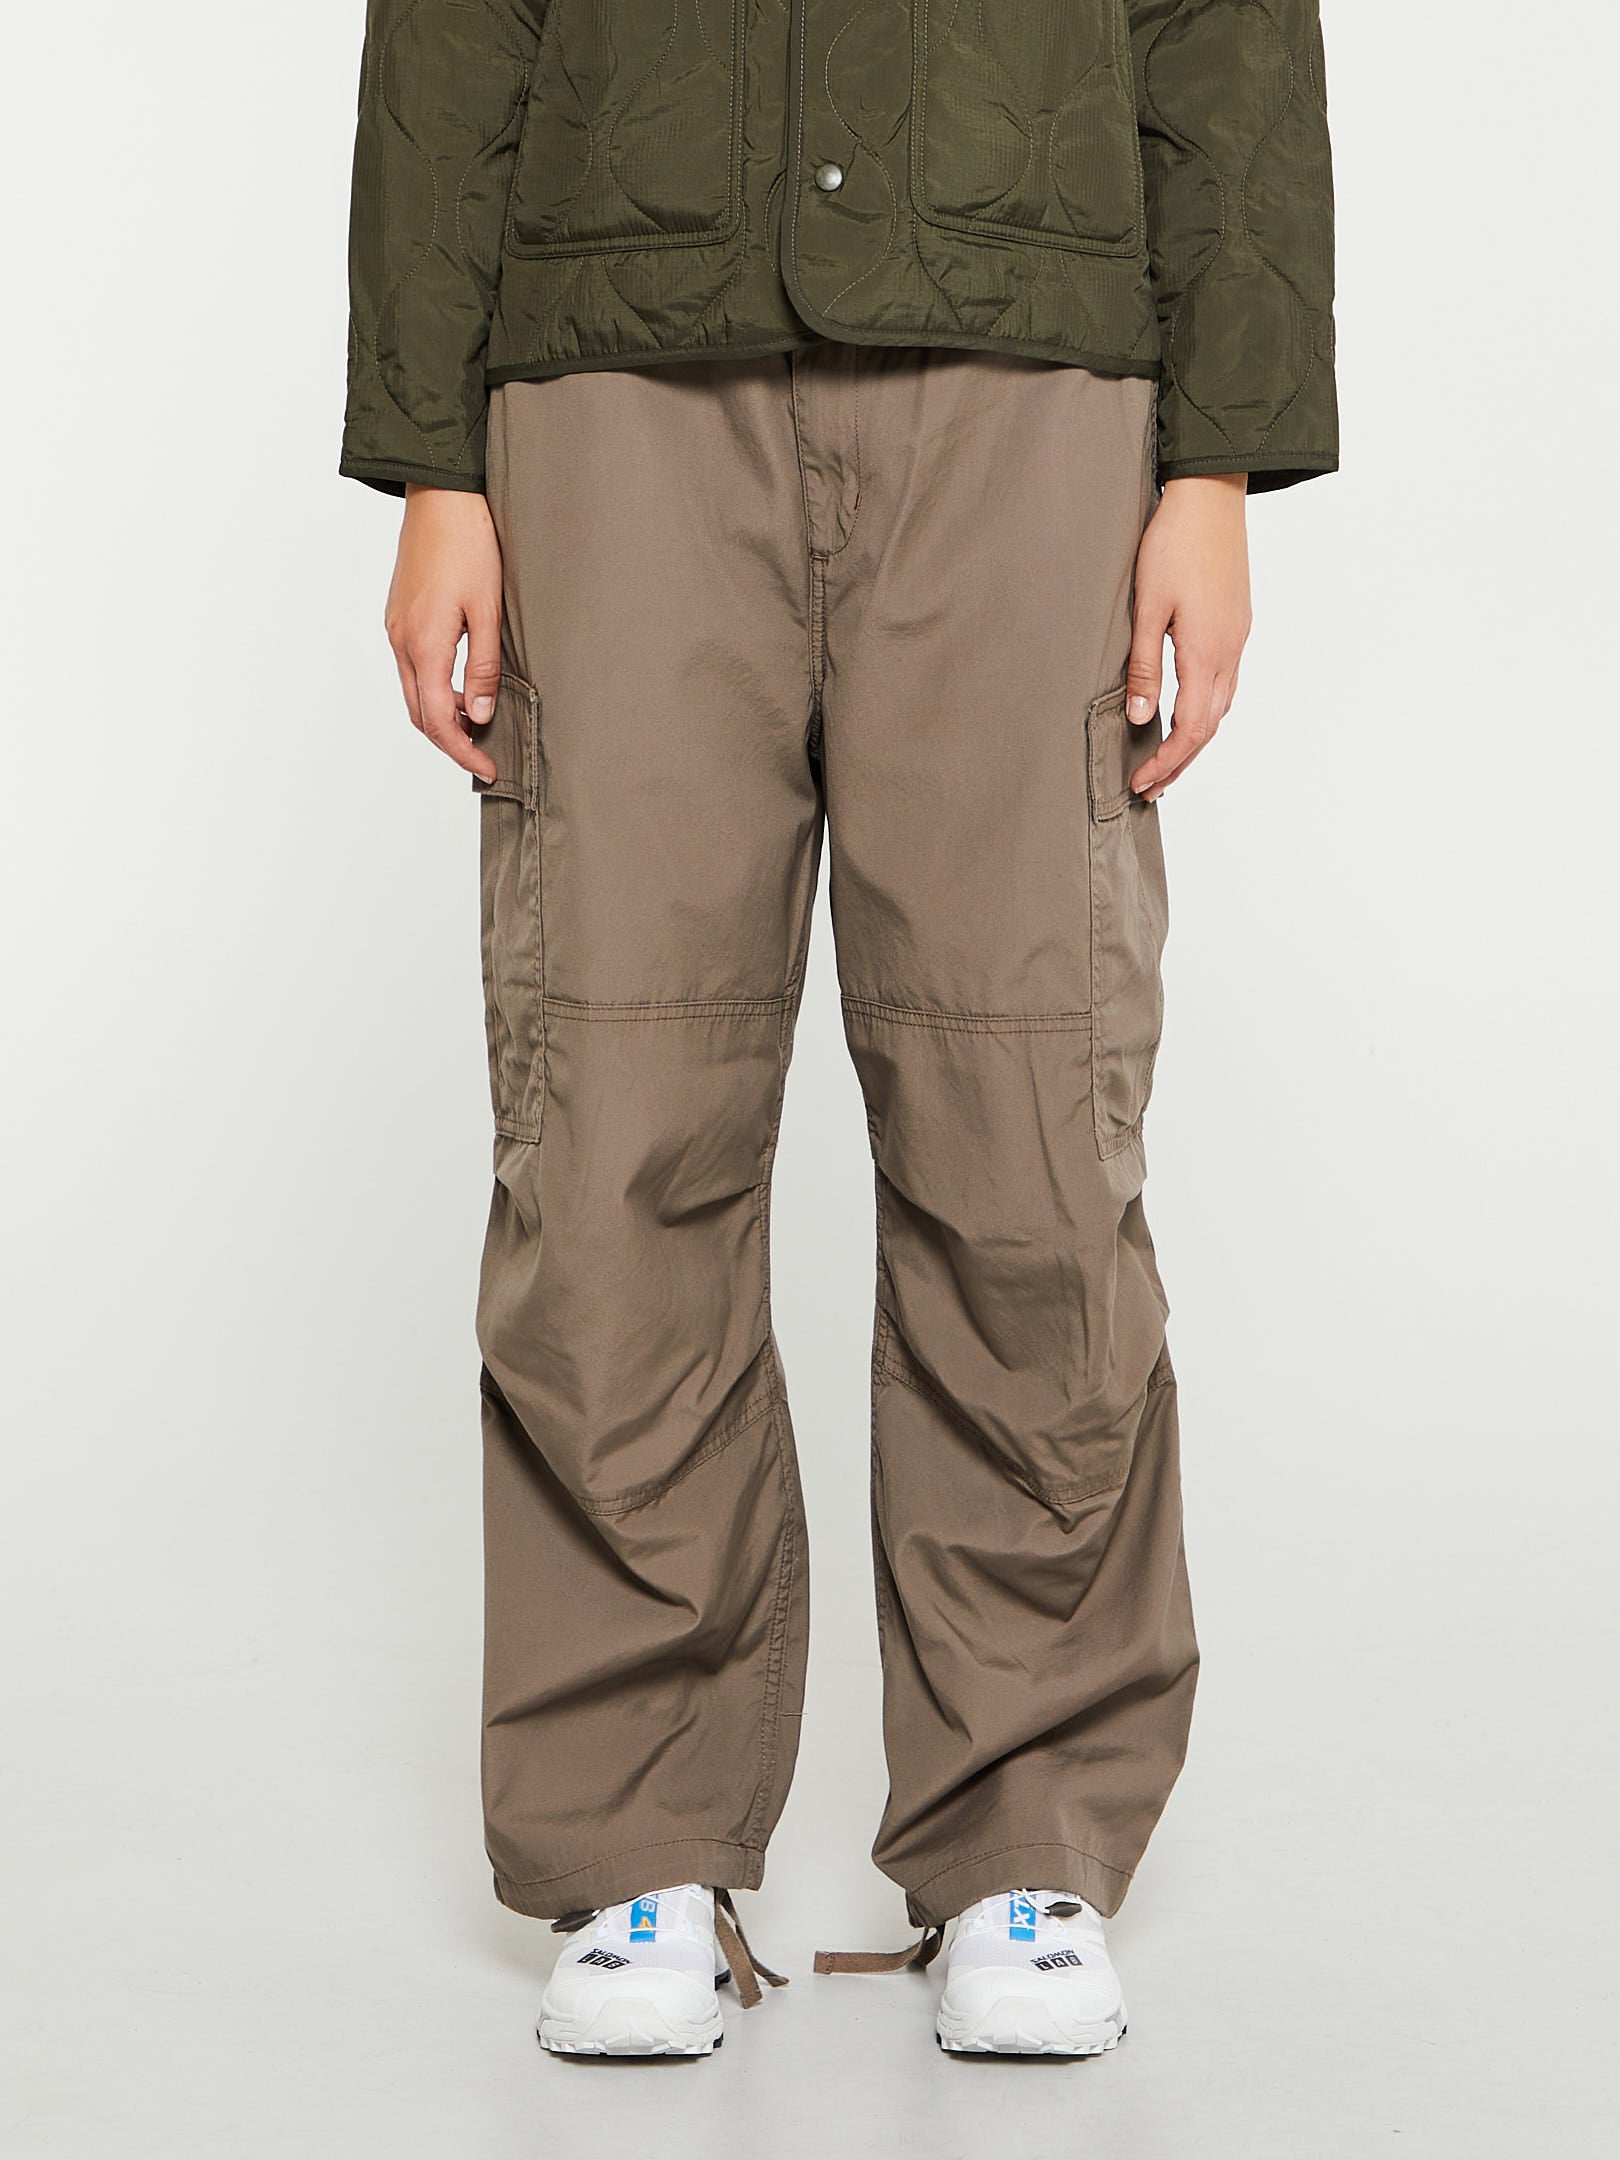 Carhartt WIP - W' Jet Cargo Pant in Barista Rinsed